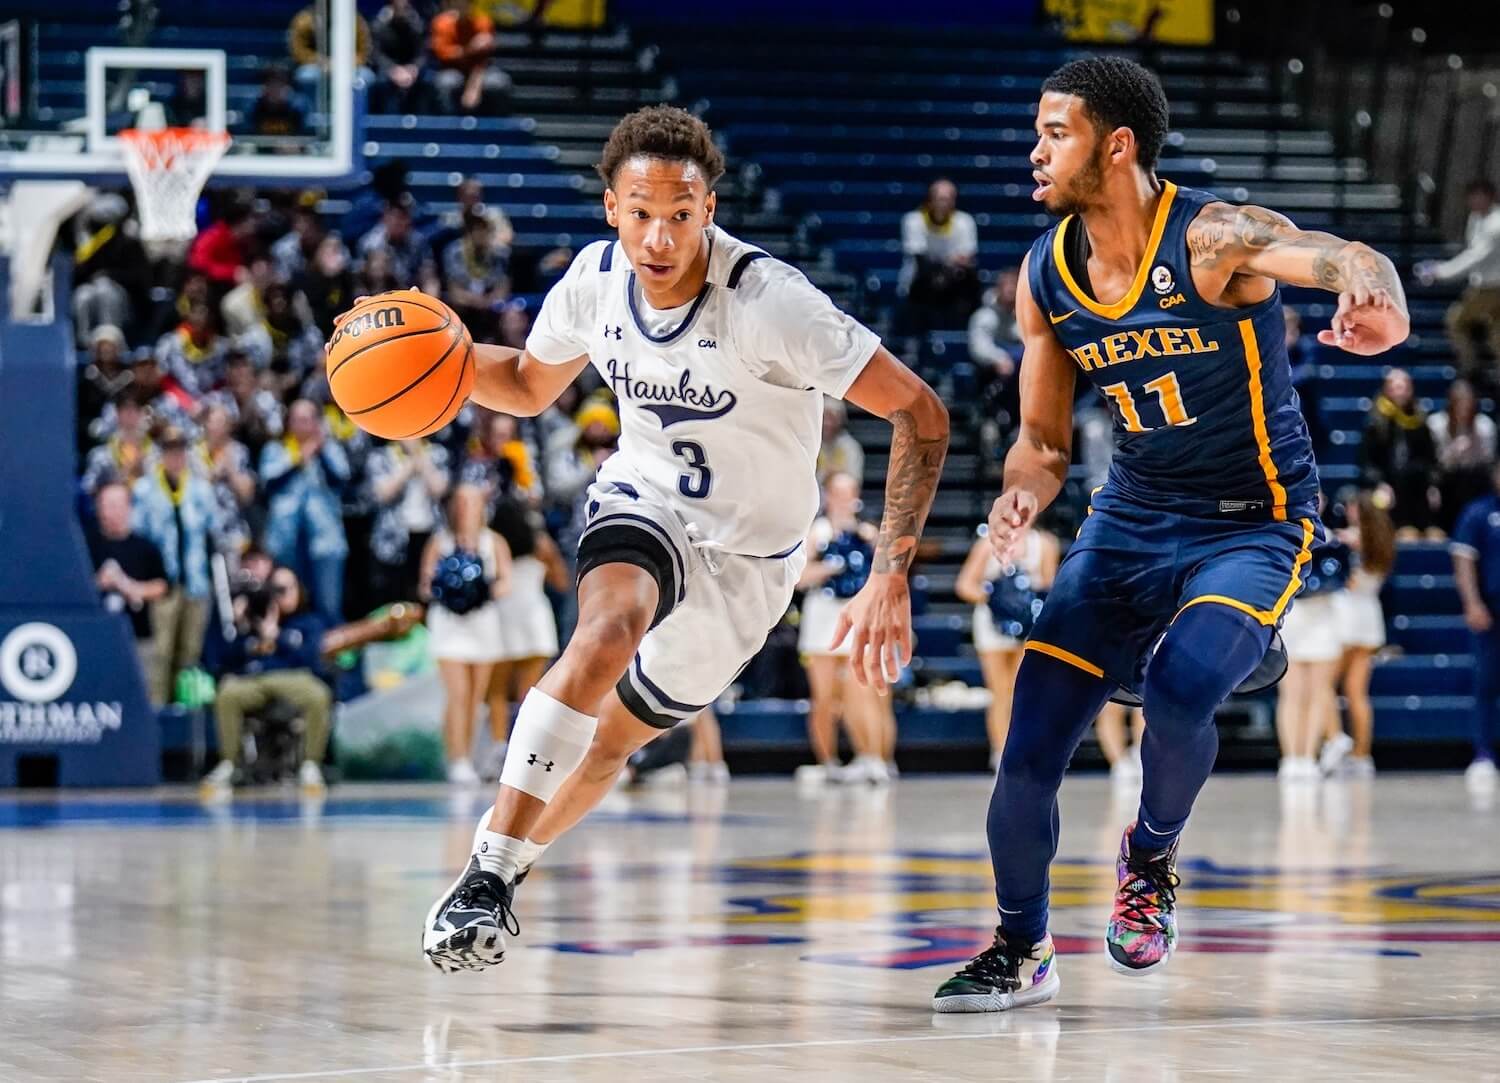 Hawks basketball player dribbling a ball while a Drexel player stays in his area